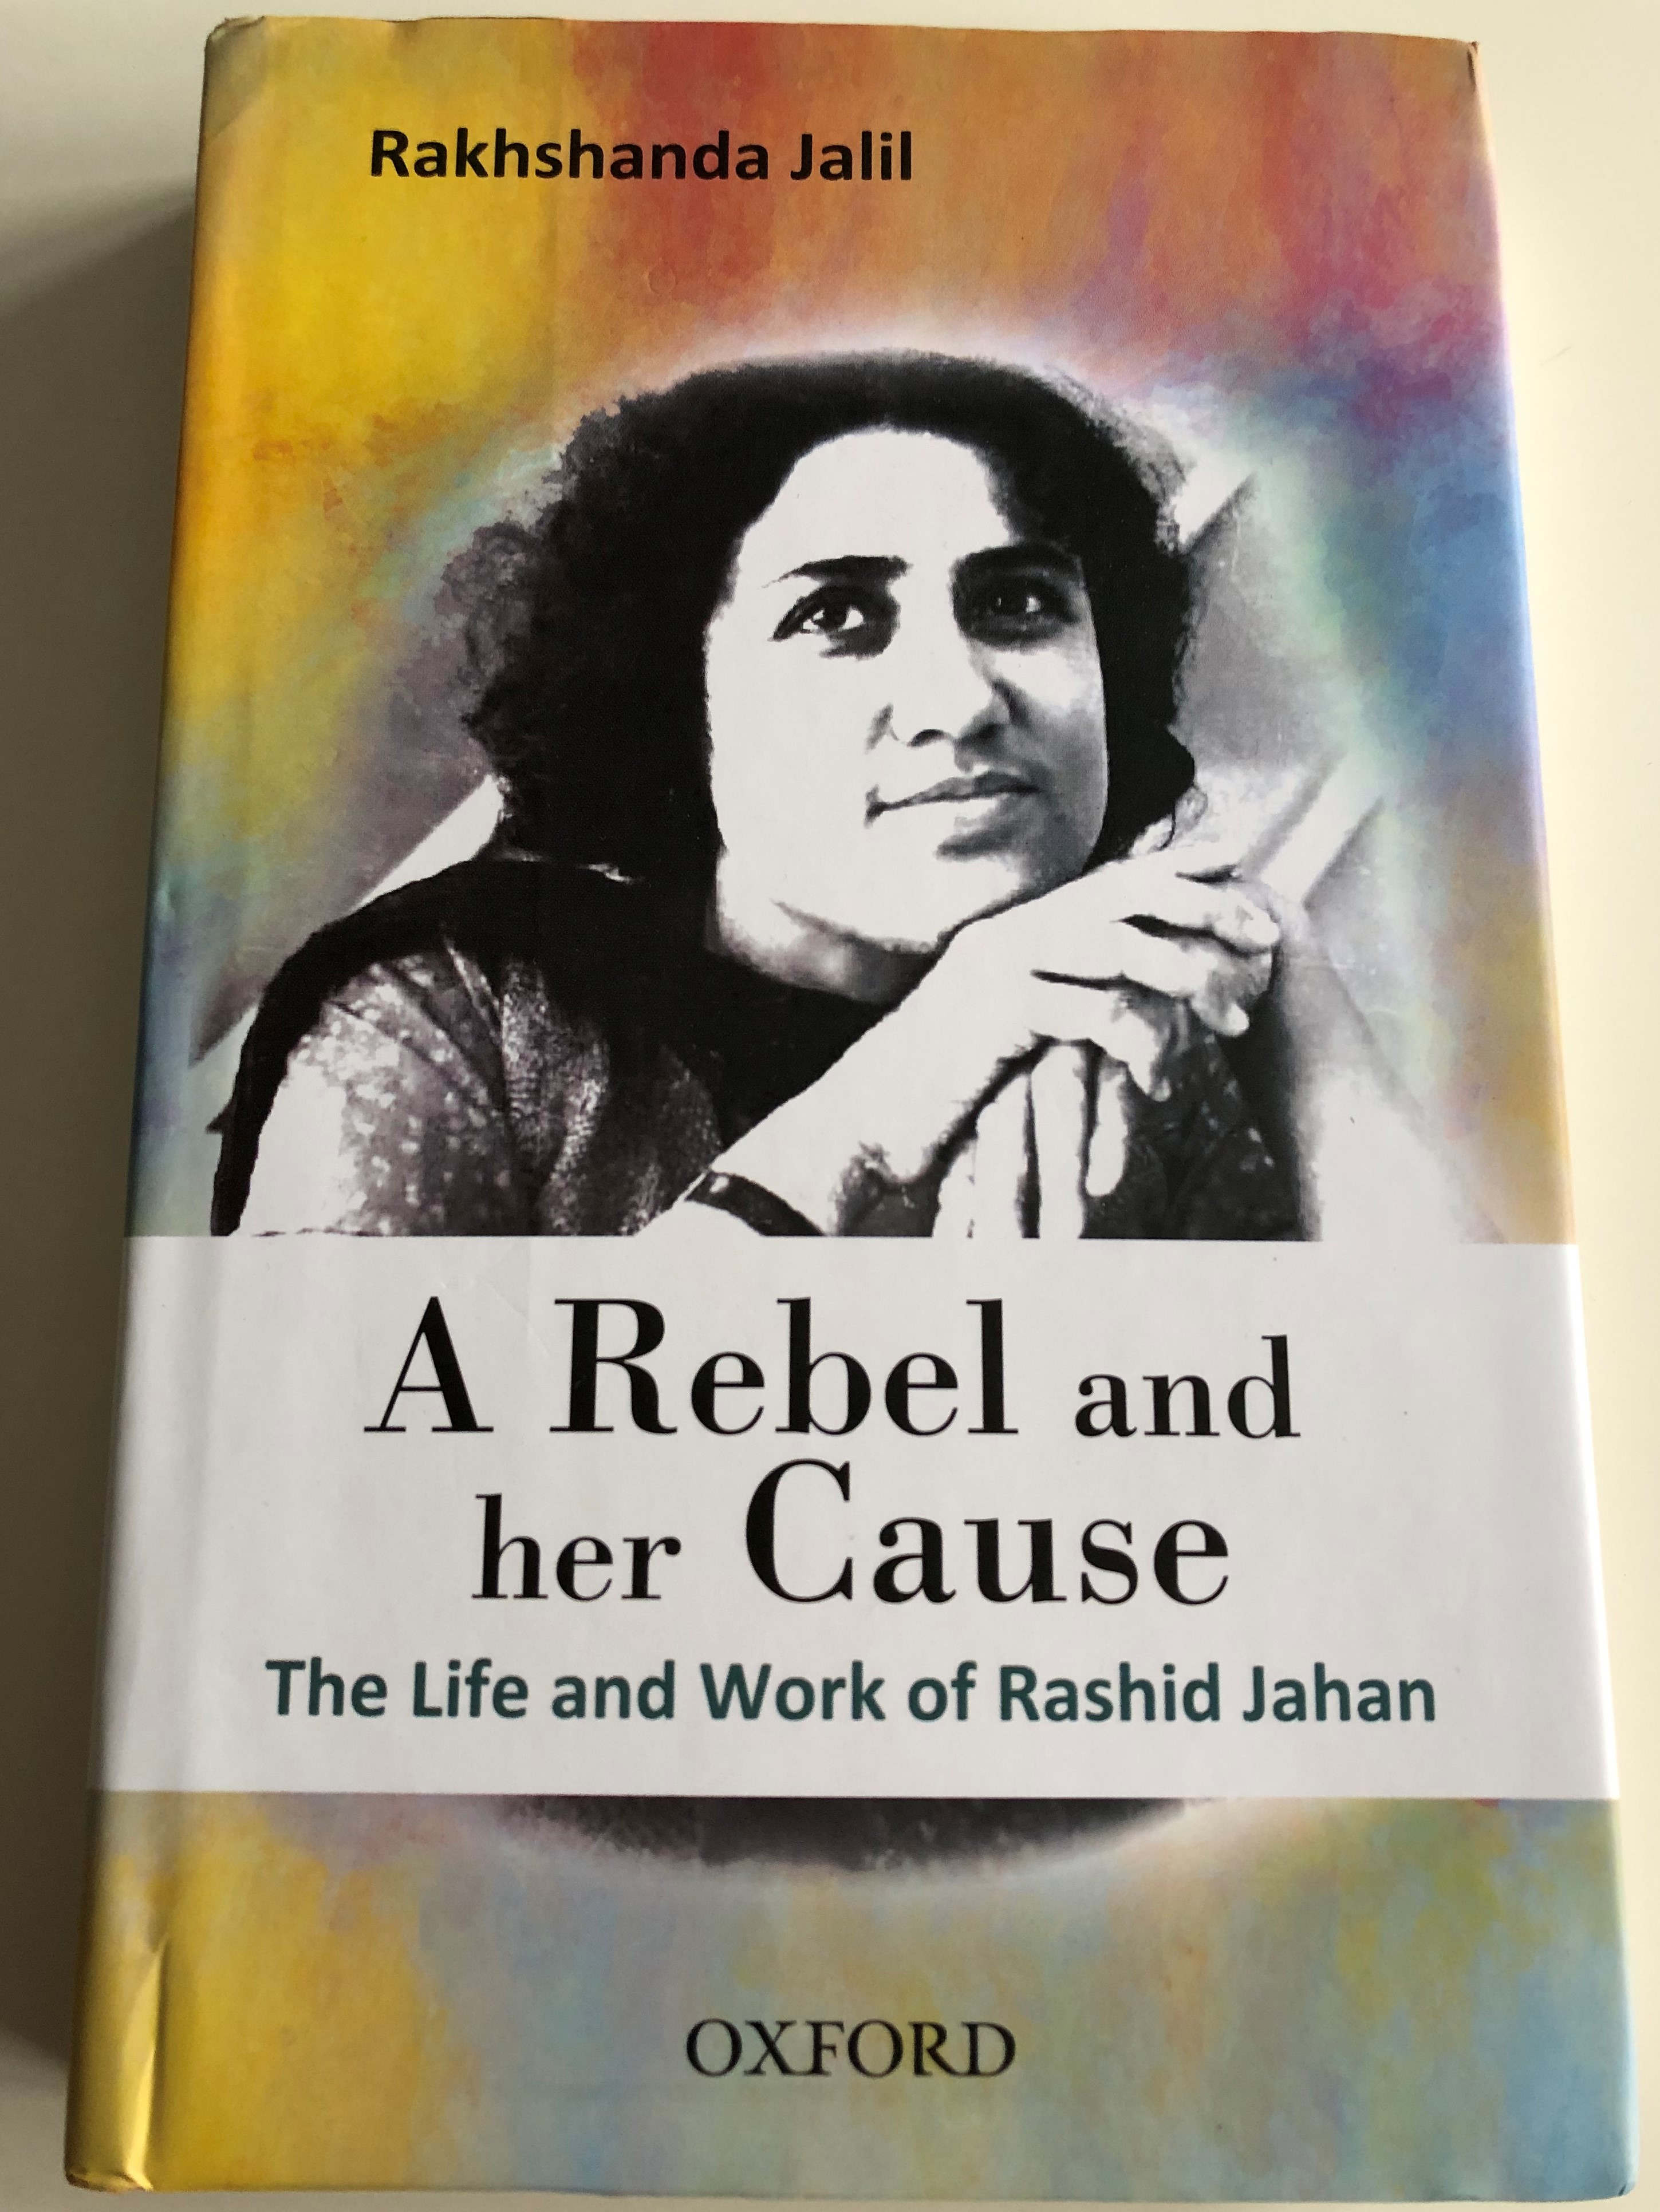 a-rebel-and-her-cause-by-rakhshanda-jalil-the-life-and-work-of-rashid-jahan-1-.jpg